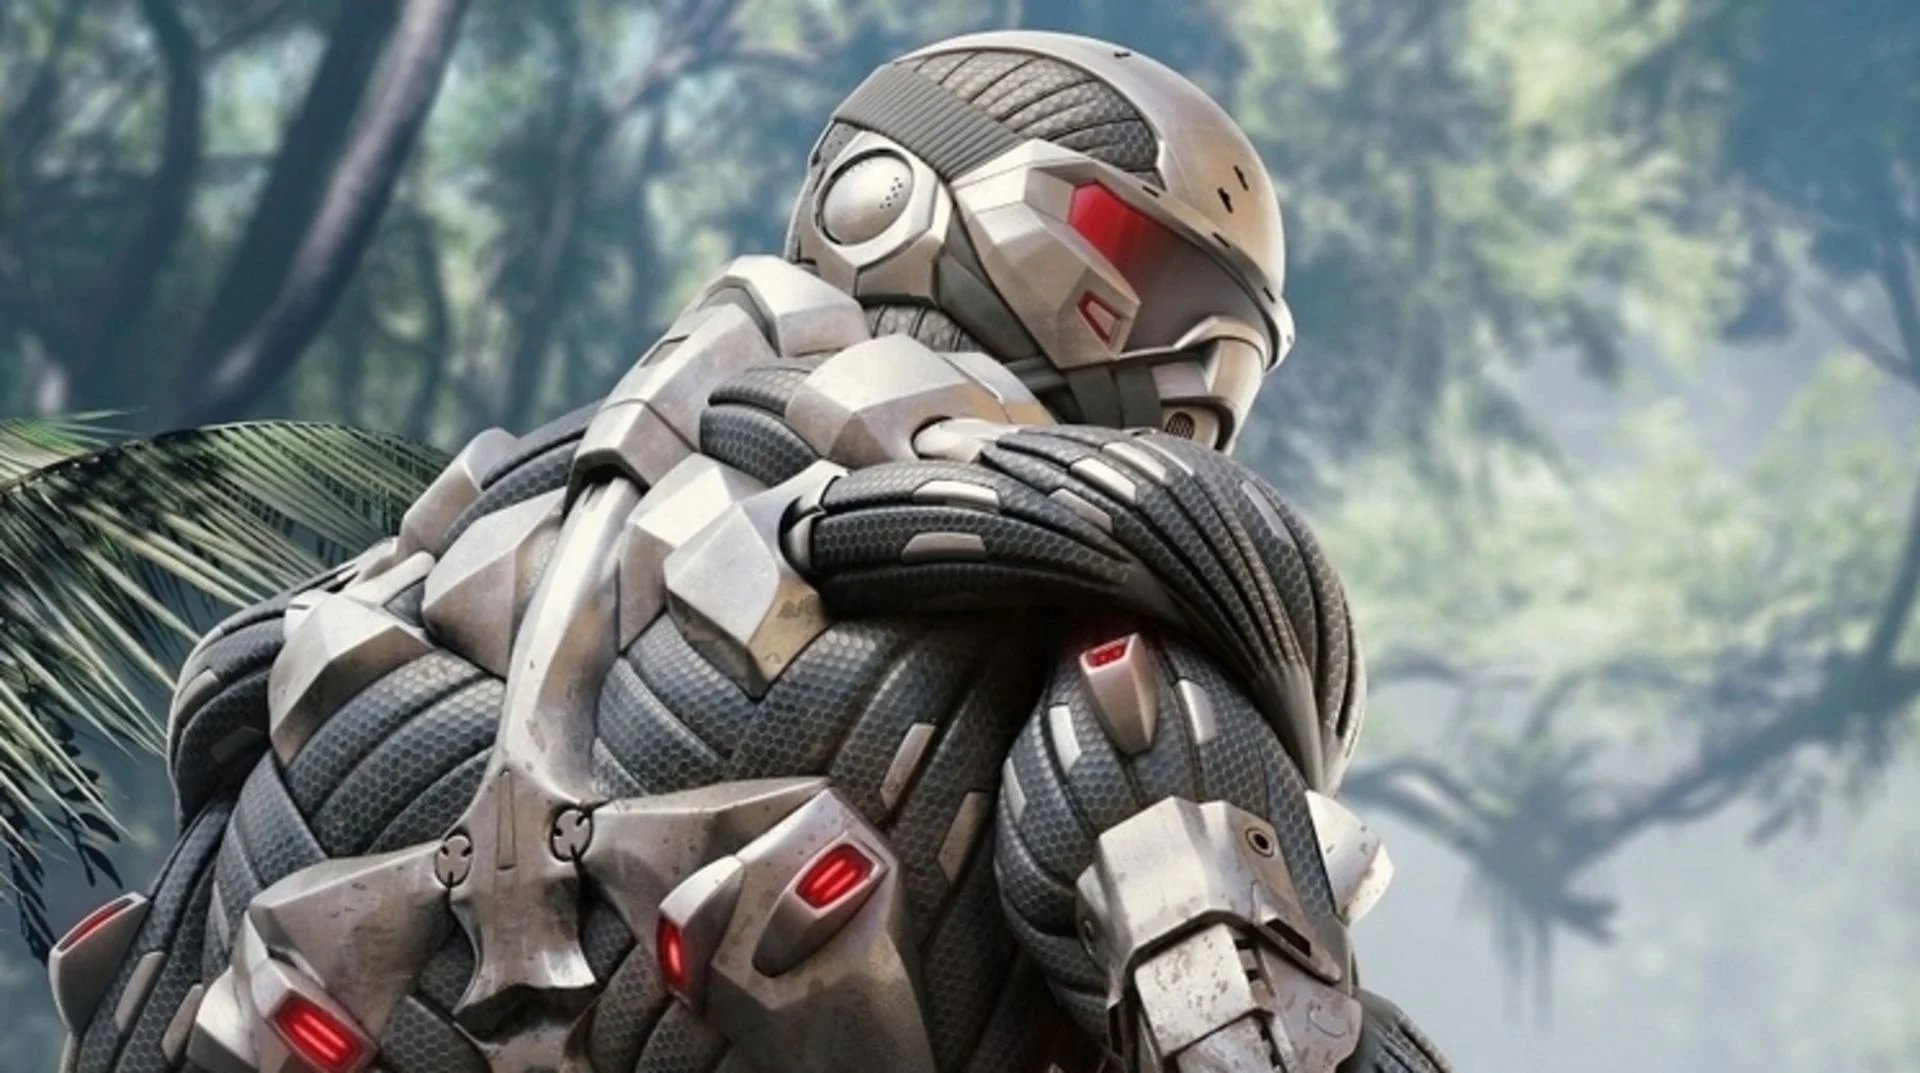 Crysis Remastered Trilogy launches on PC & consoles this October